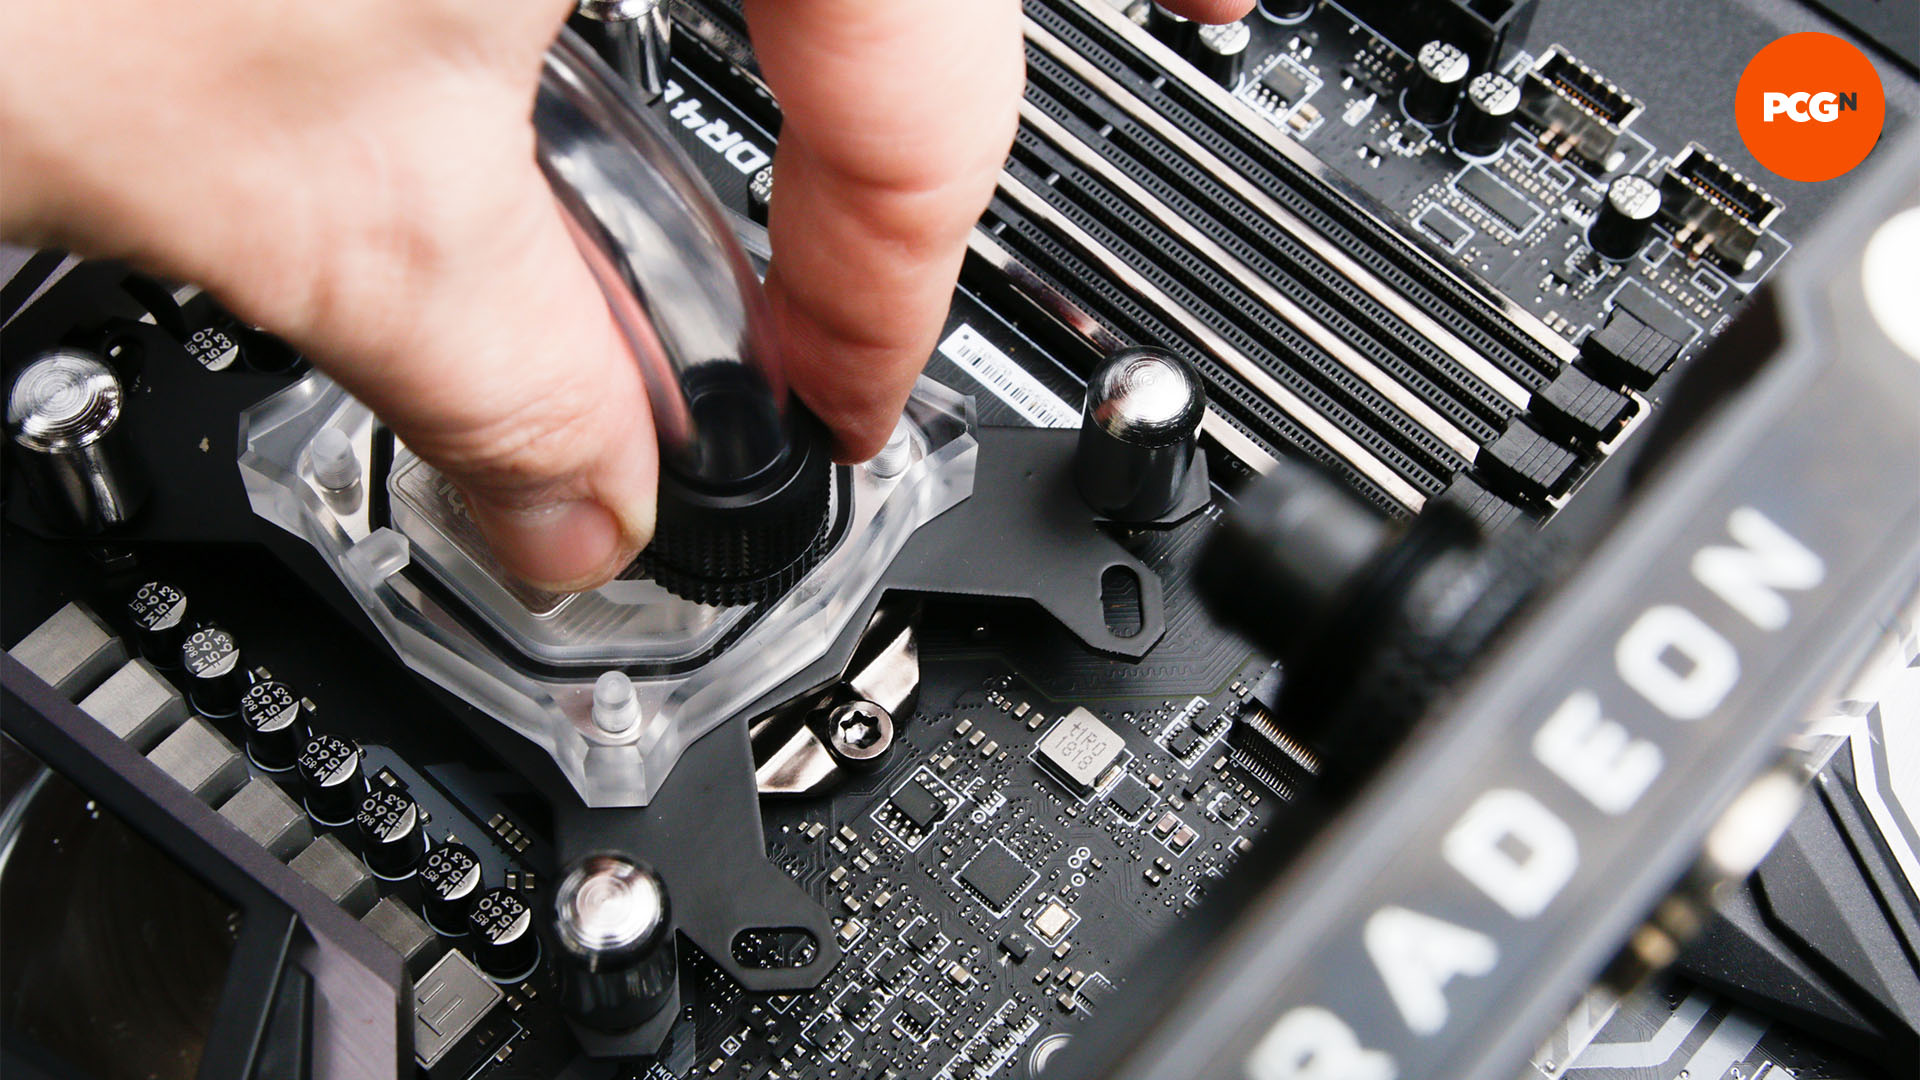 How to water cool your PC: Tighten fitting on CPU waterblock